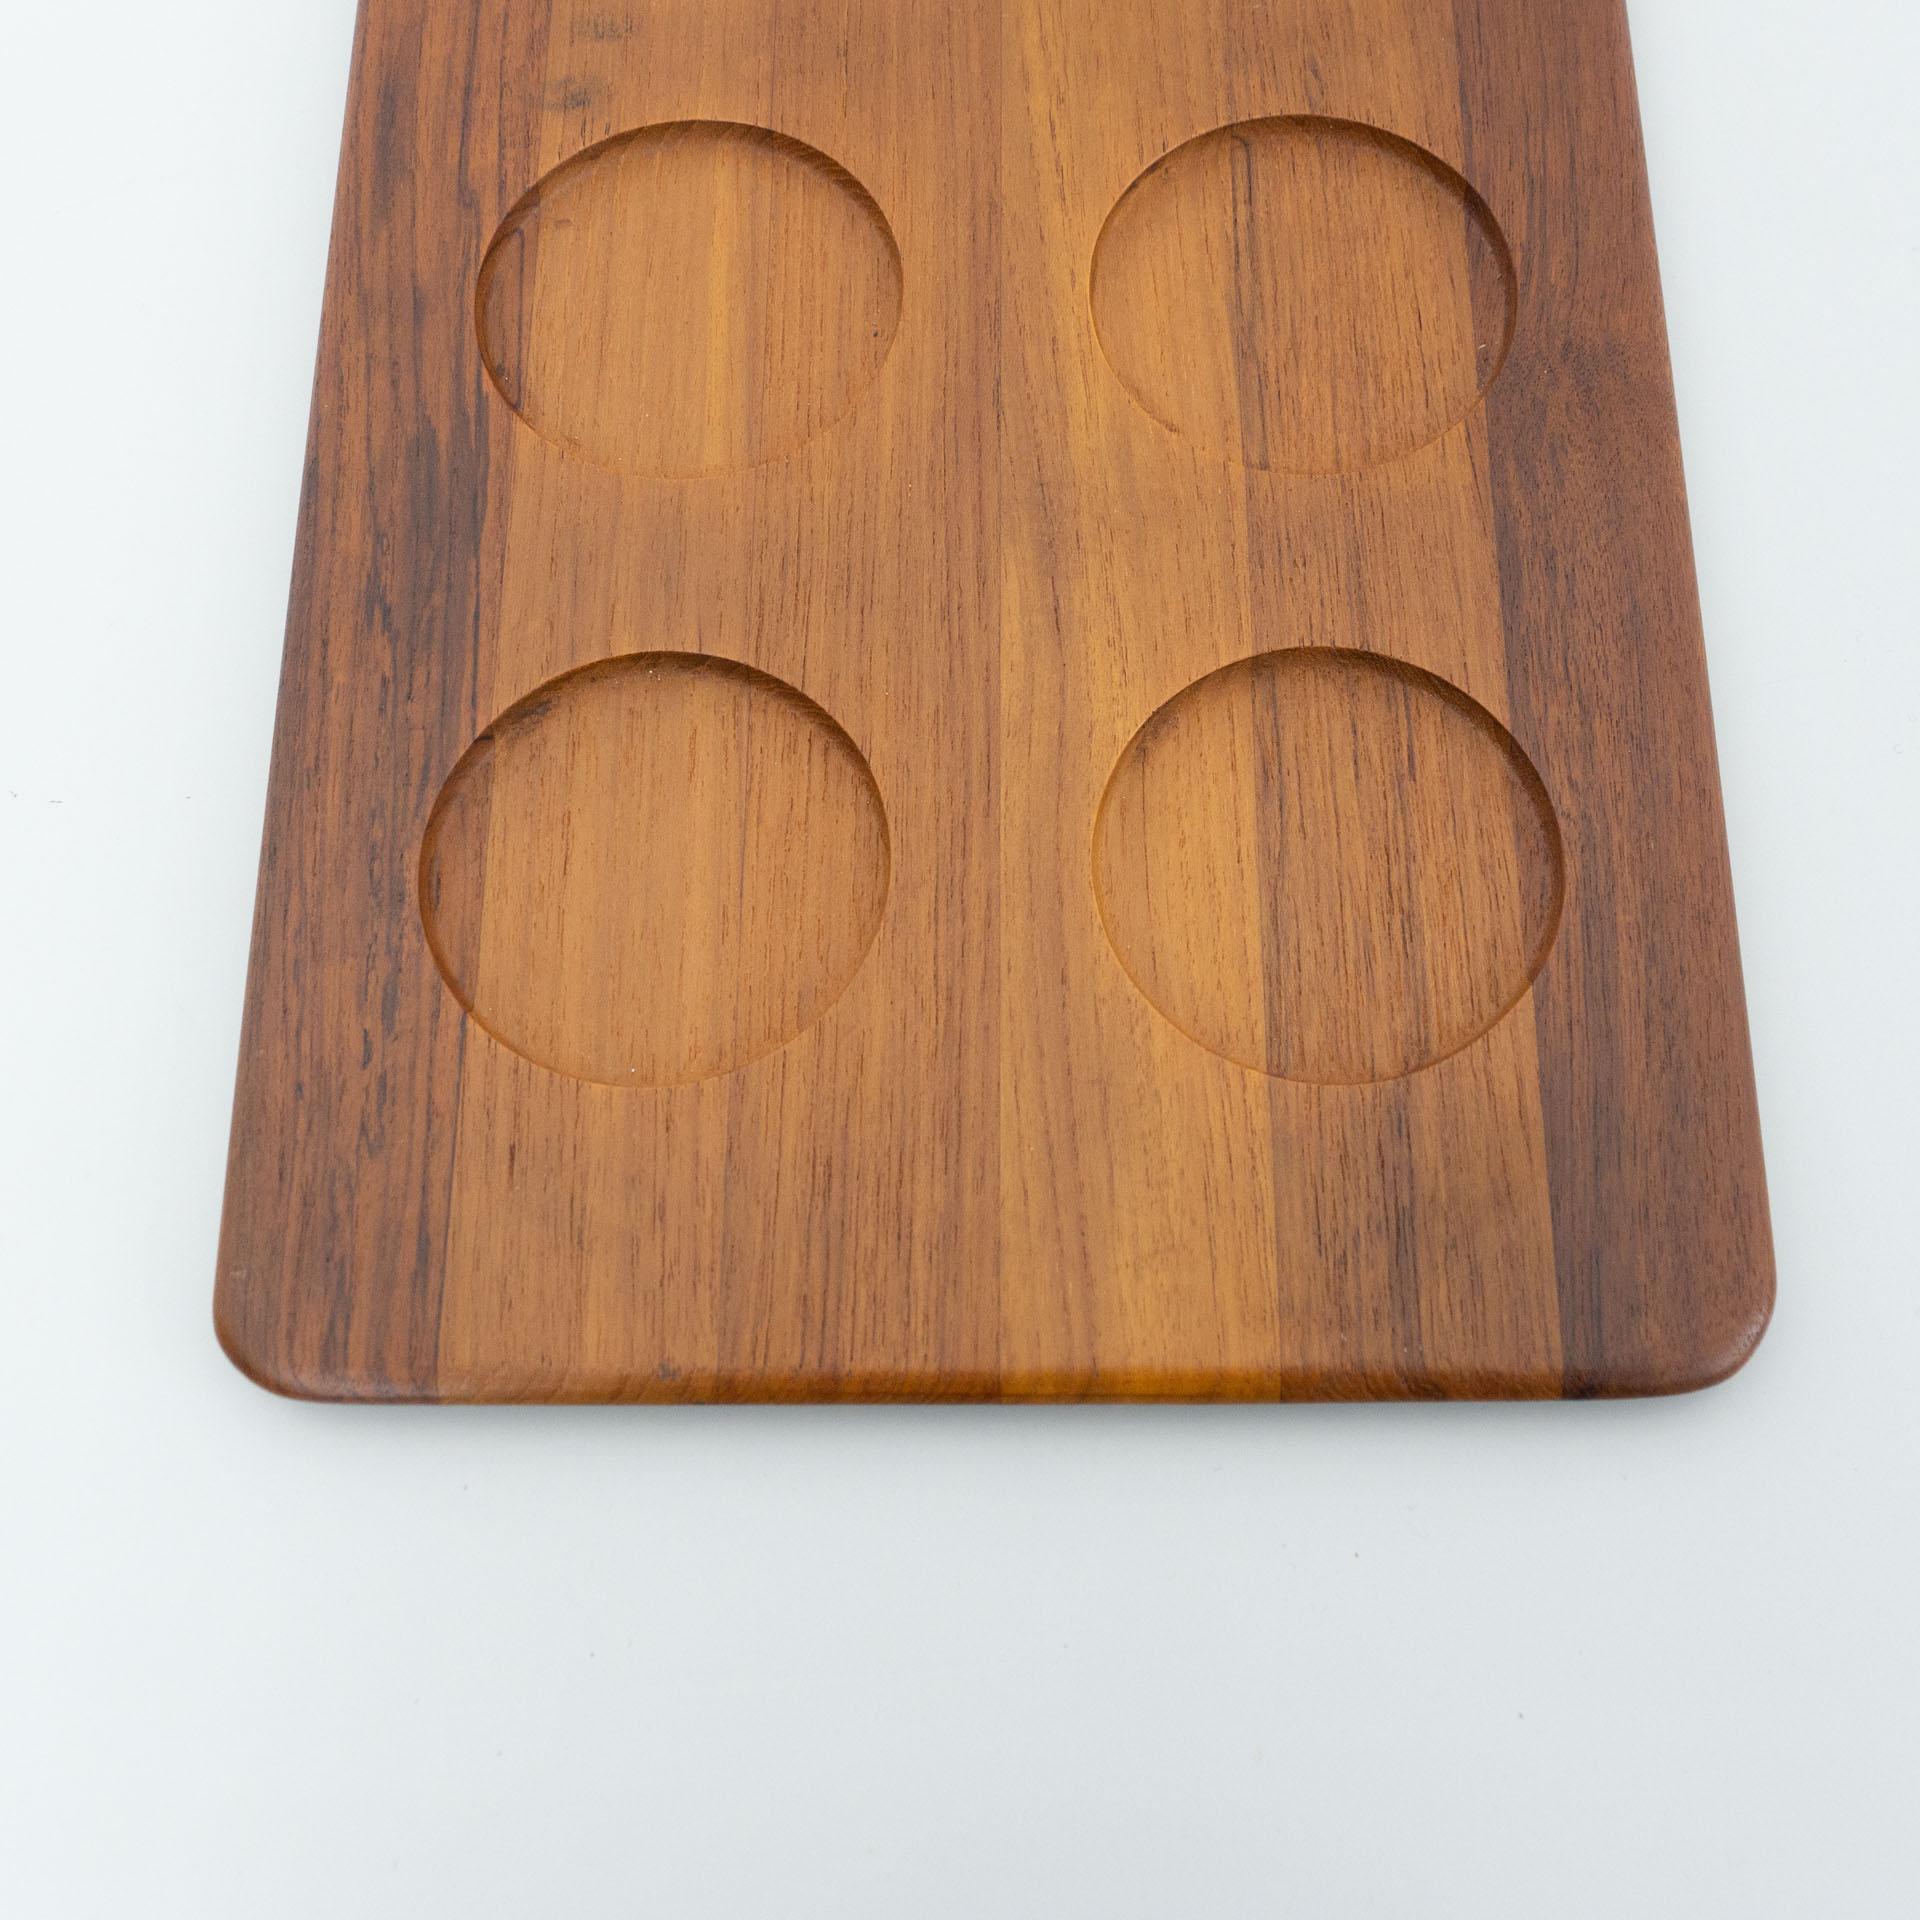 Danish Wooden Tray for Glasses by Digmed from 1964